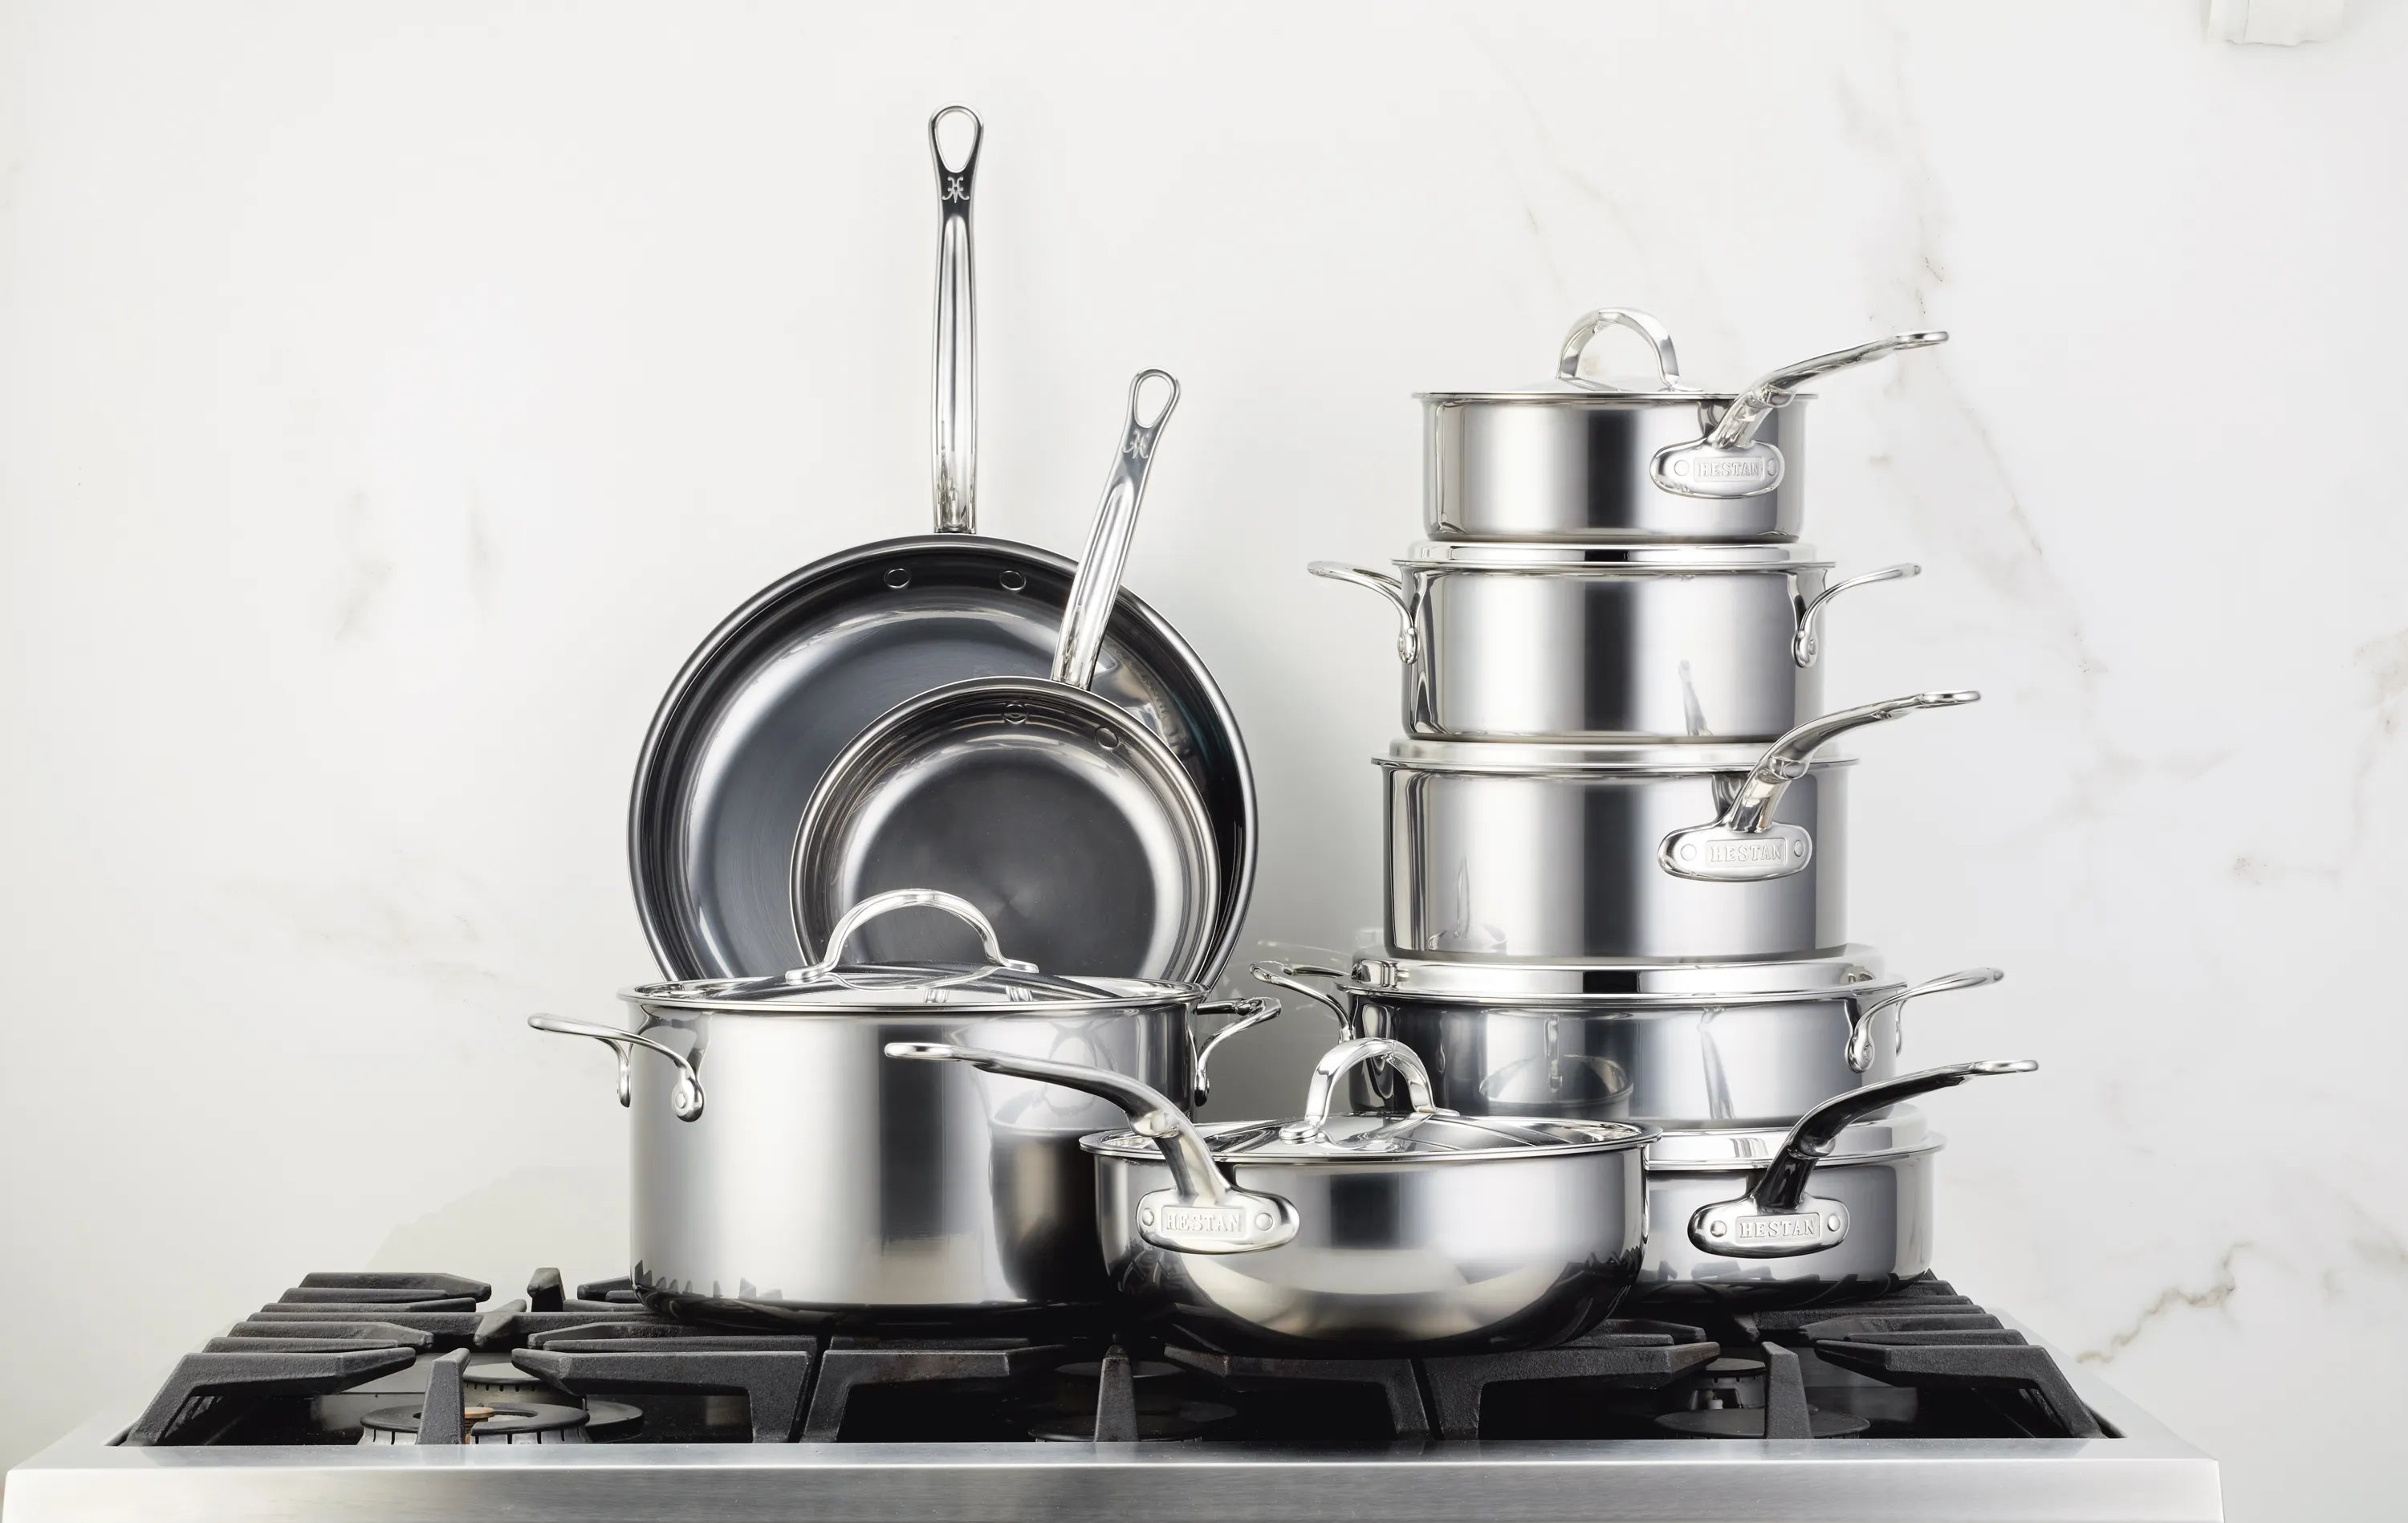 Cookware Collections